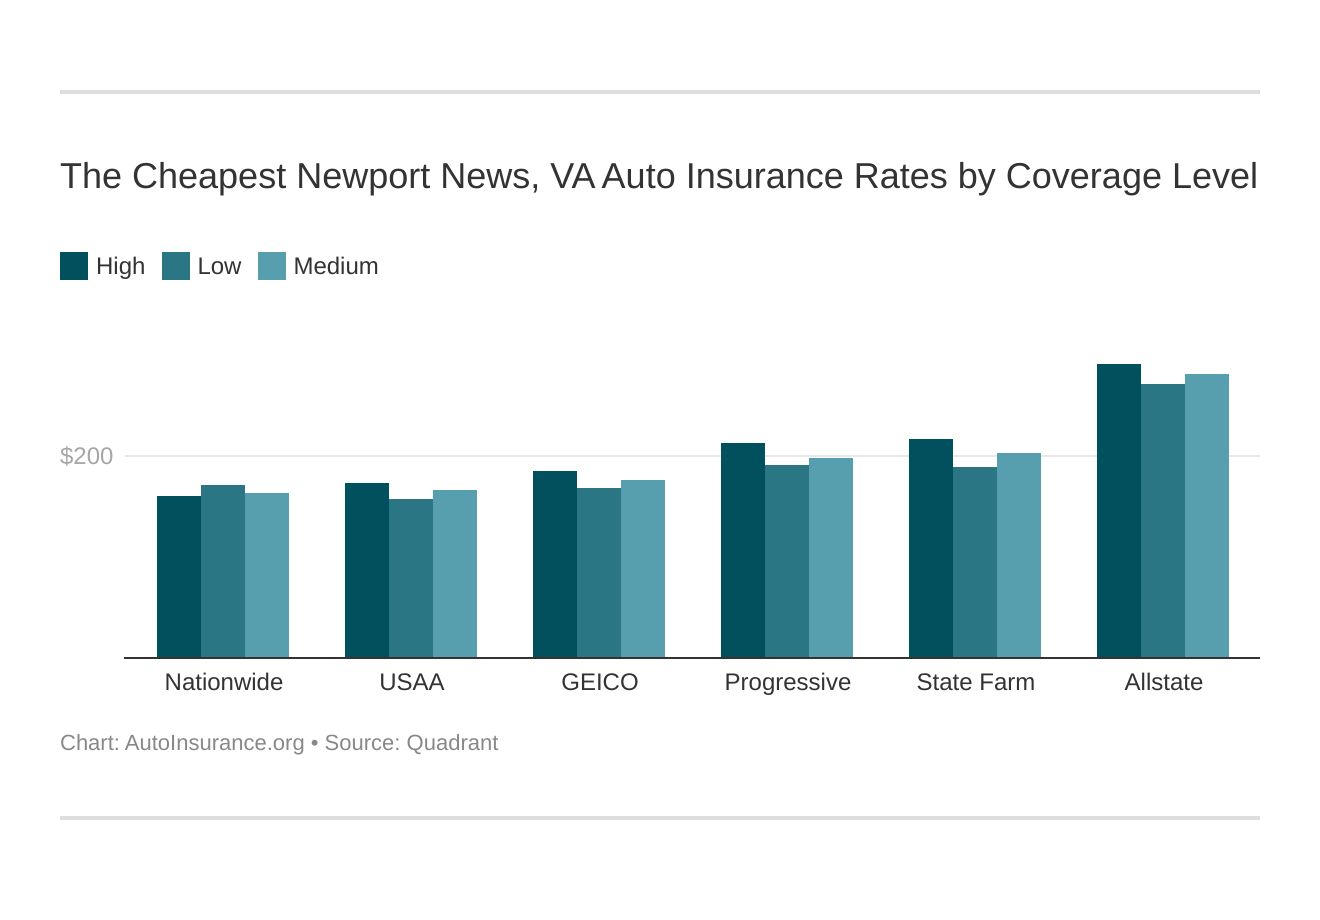 The Cheapest Newport News, VA Auto Insurance Rates by Coverage Level